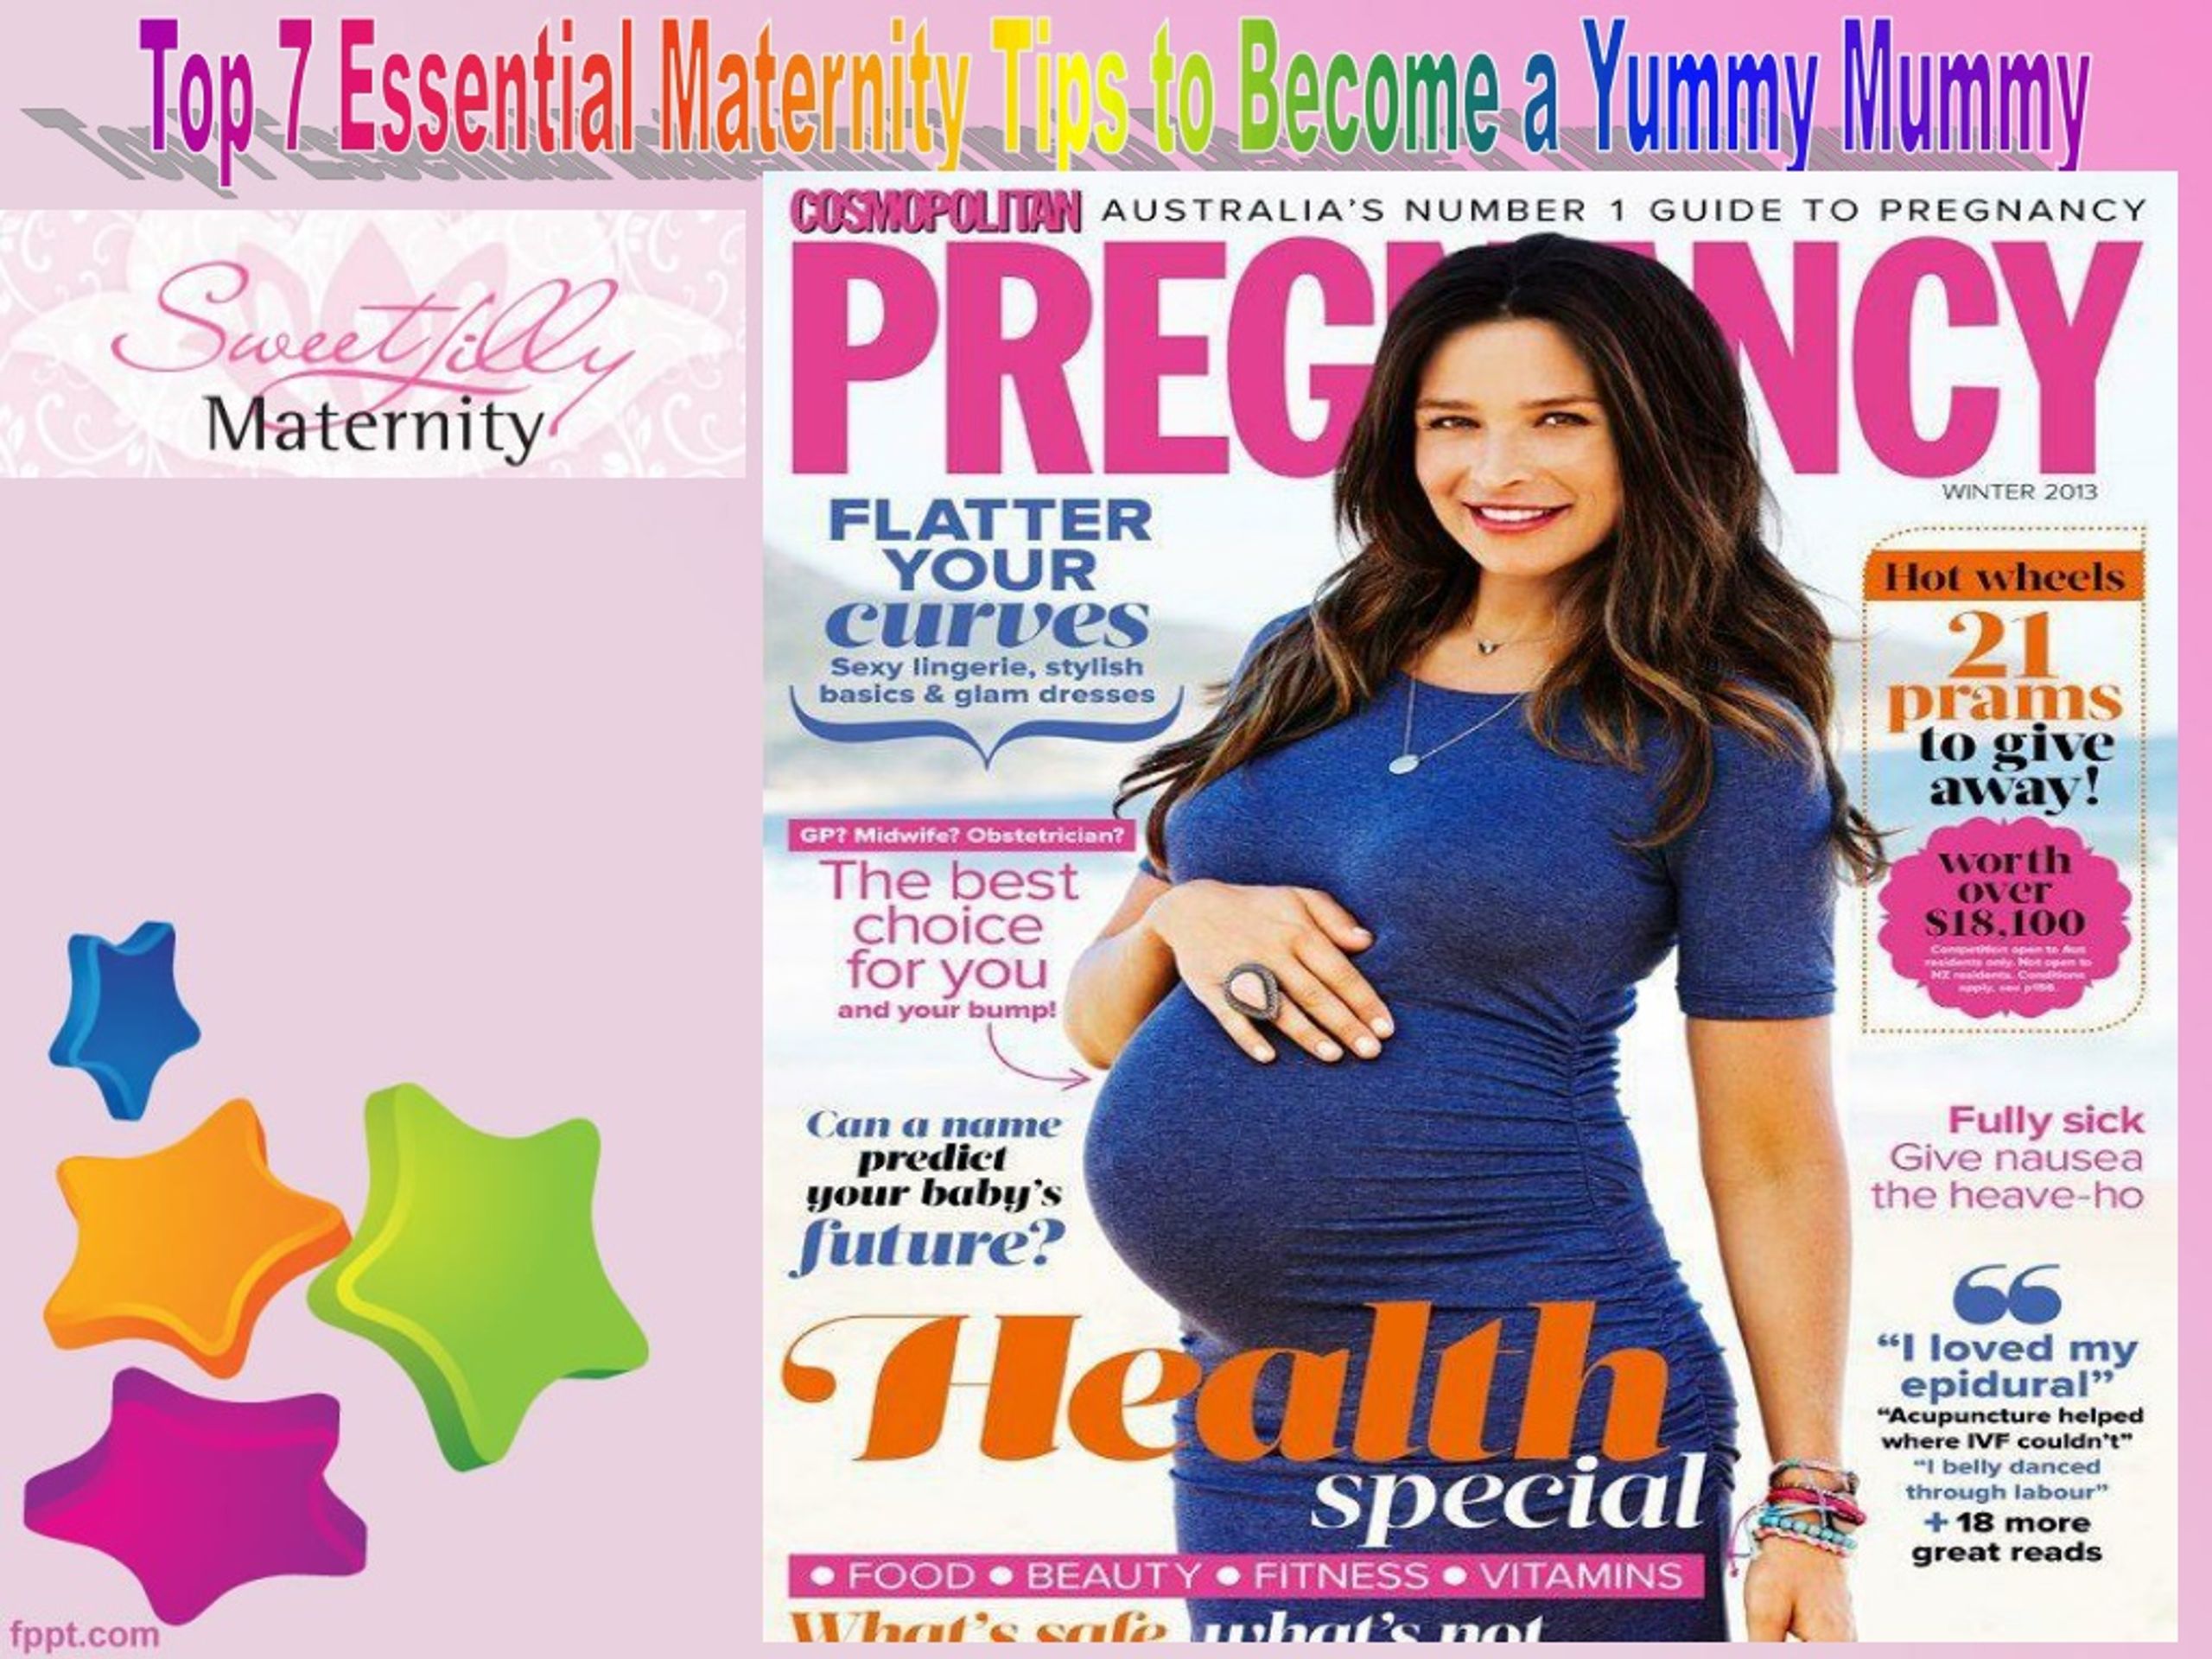 https://image4.slideserve.com/1485786/top-7-essential-maternity-tips-to-become-a-yummy-l.jpg